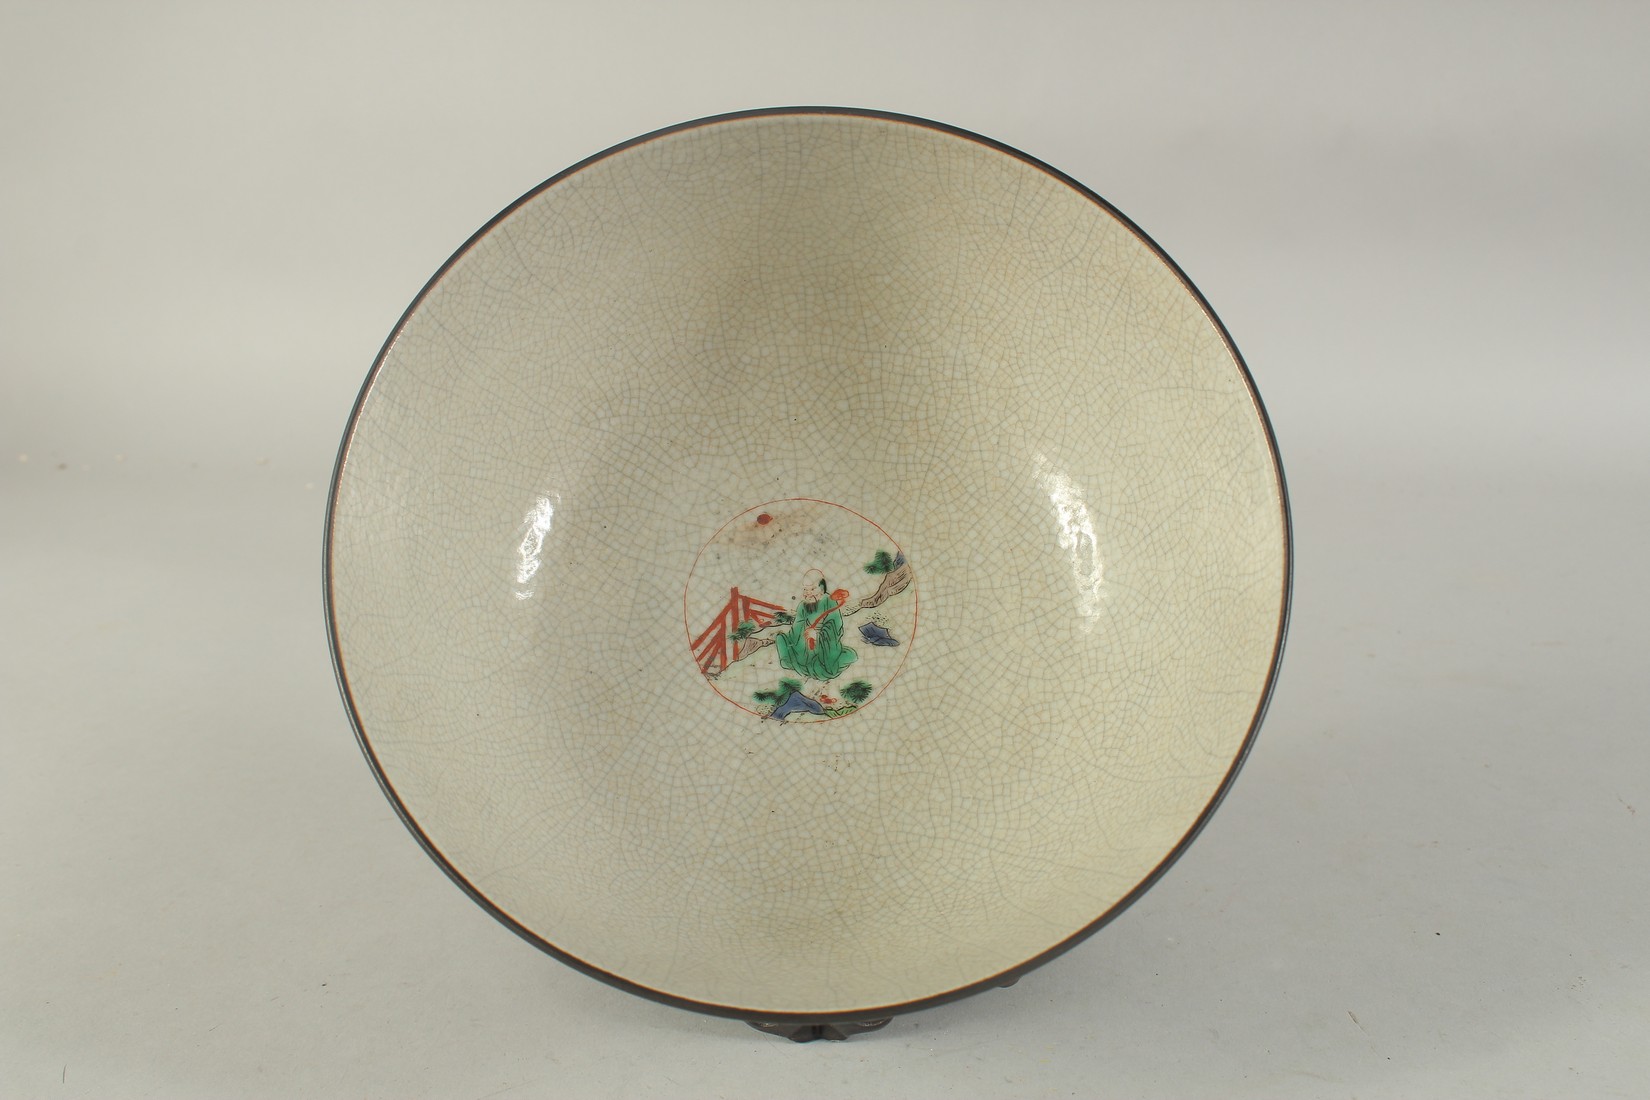 A CHINESE FAMILLE VERTE PORCELAIN BOWL - possibly Qing dynasty, with hardwood stand, the exterior - Image 5 of 7